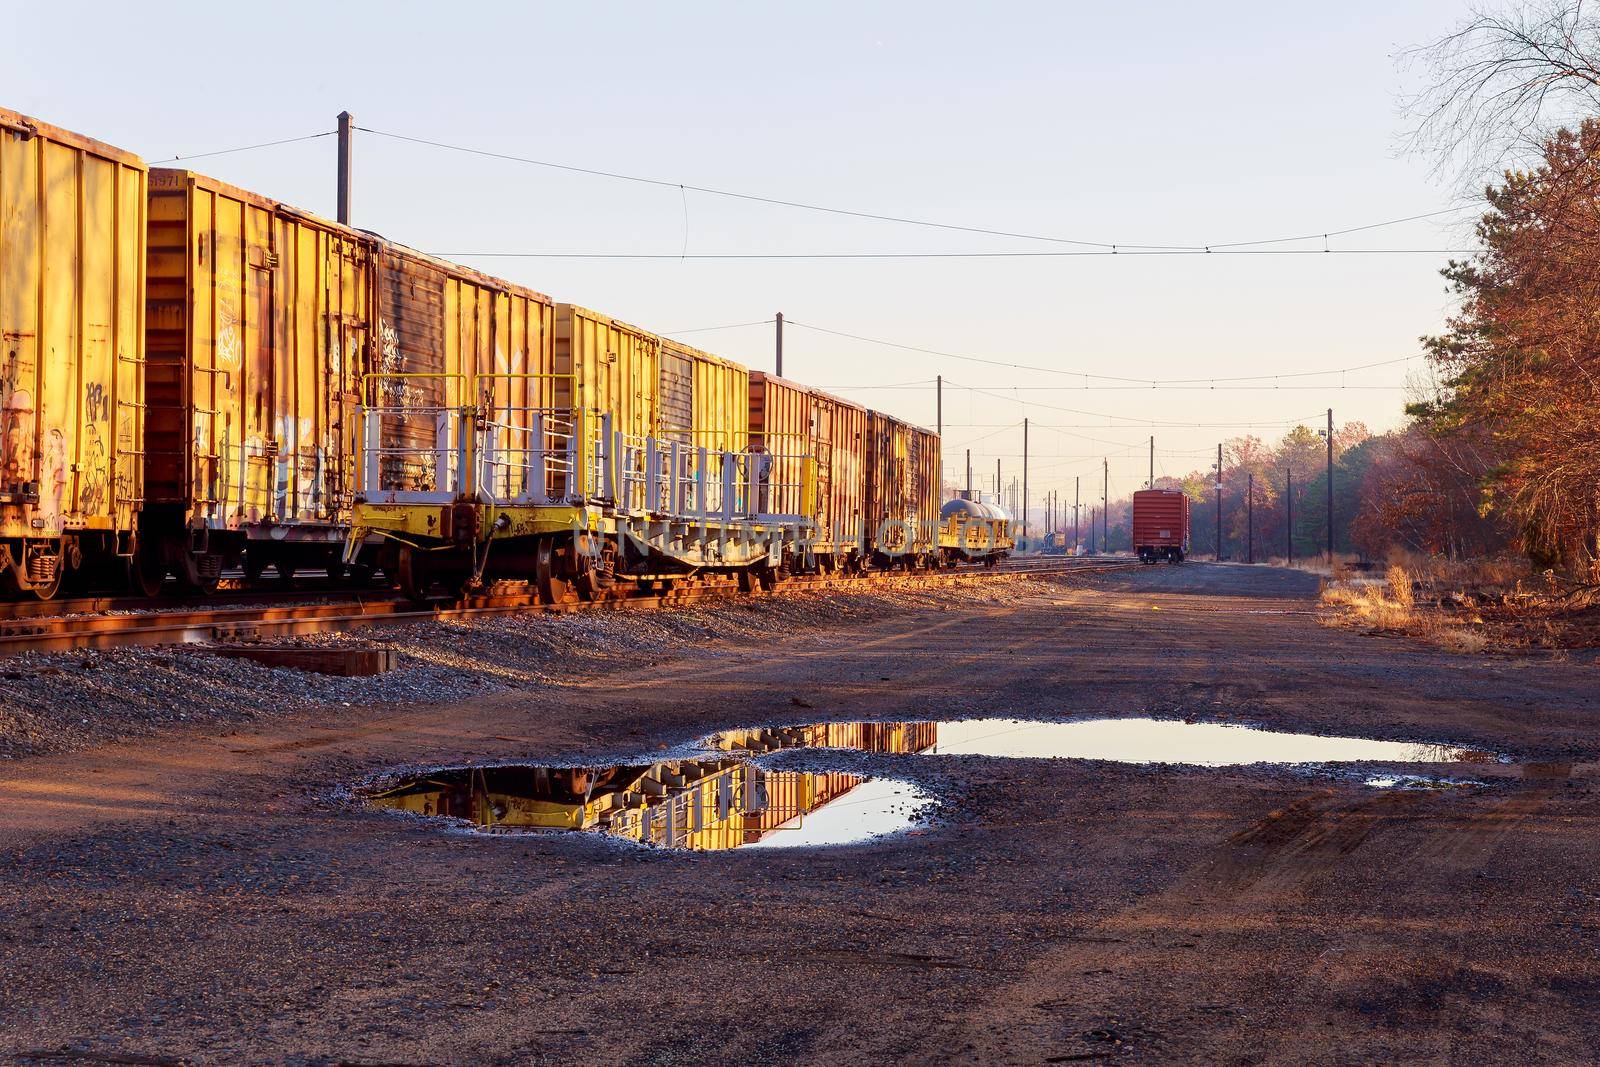 Railway cars stand on cargo station in USA road railway wagons